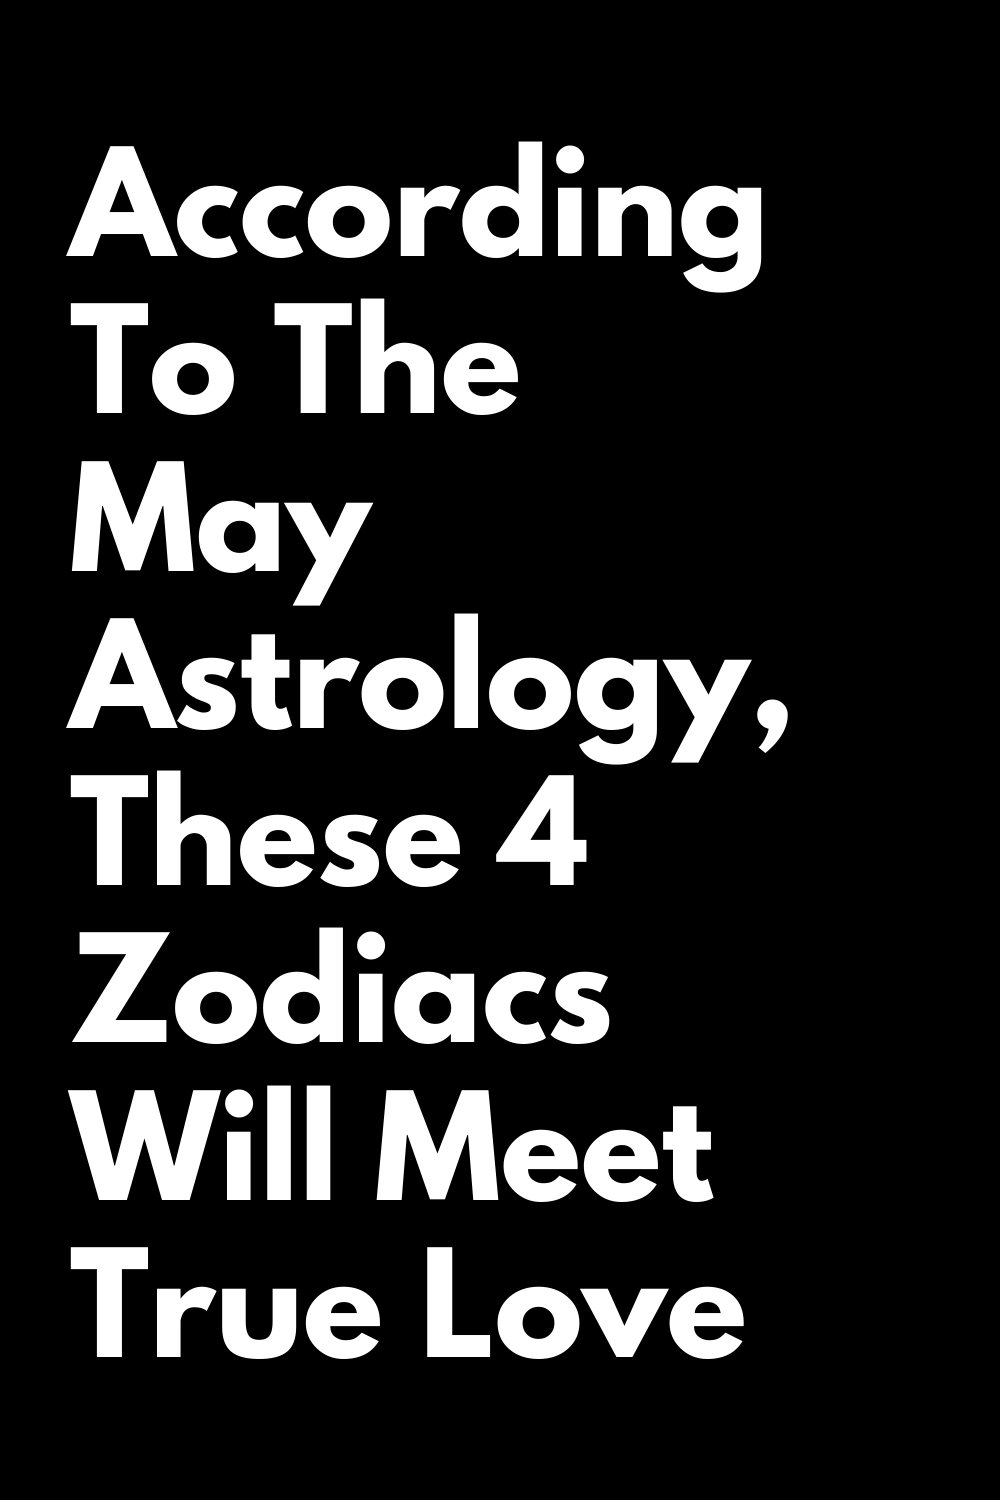 According To The May Astrology, These 4 Zodiacs Will Meet True Love ...